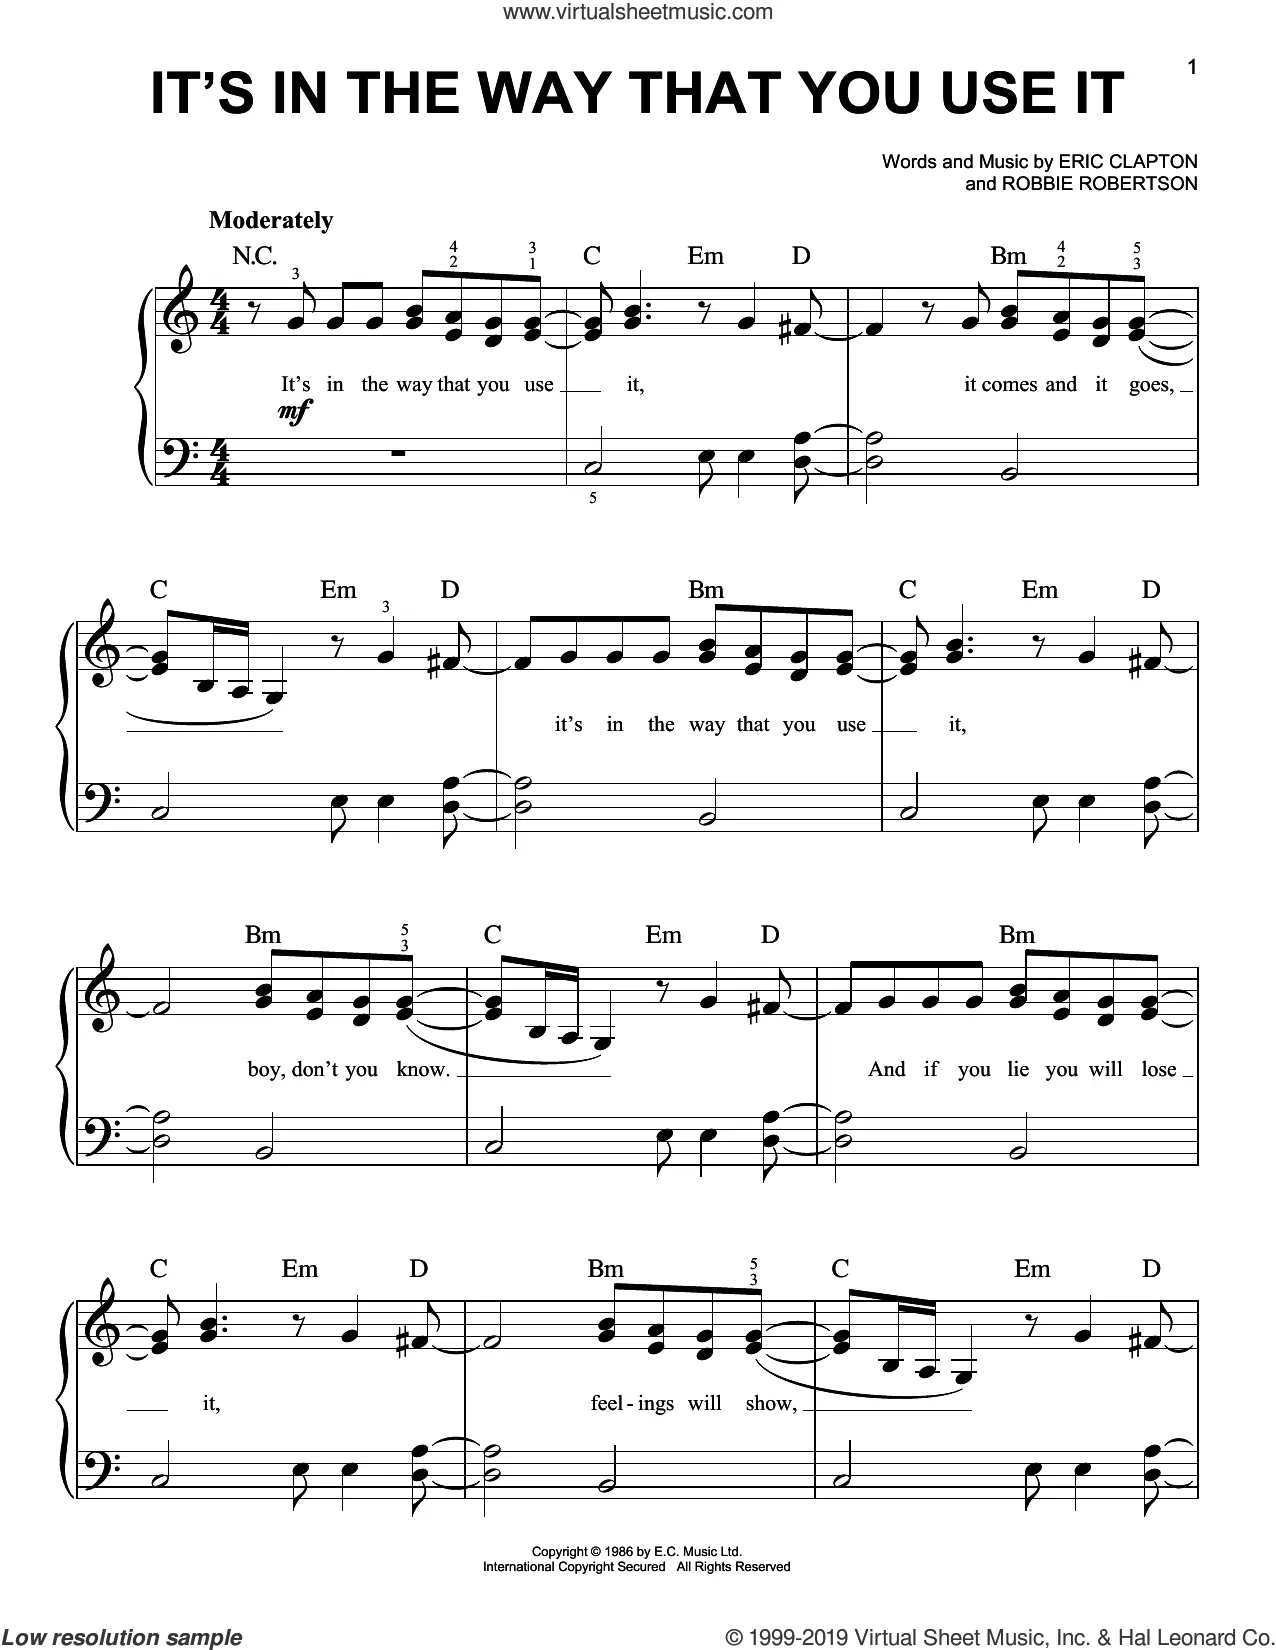 Pretending" Sheet Music by Eric Clapton for Piano/Vocal